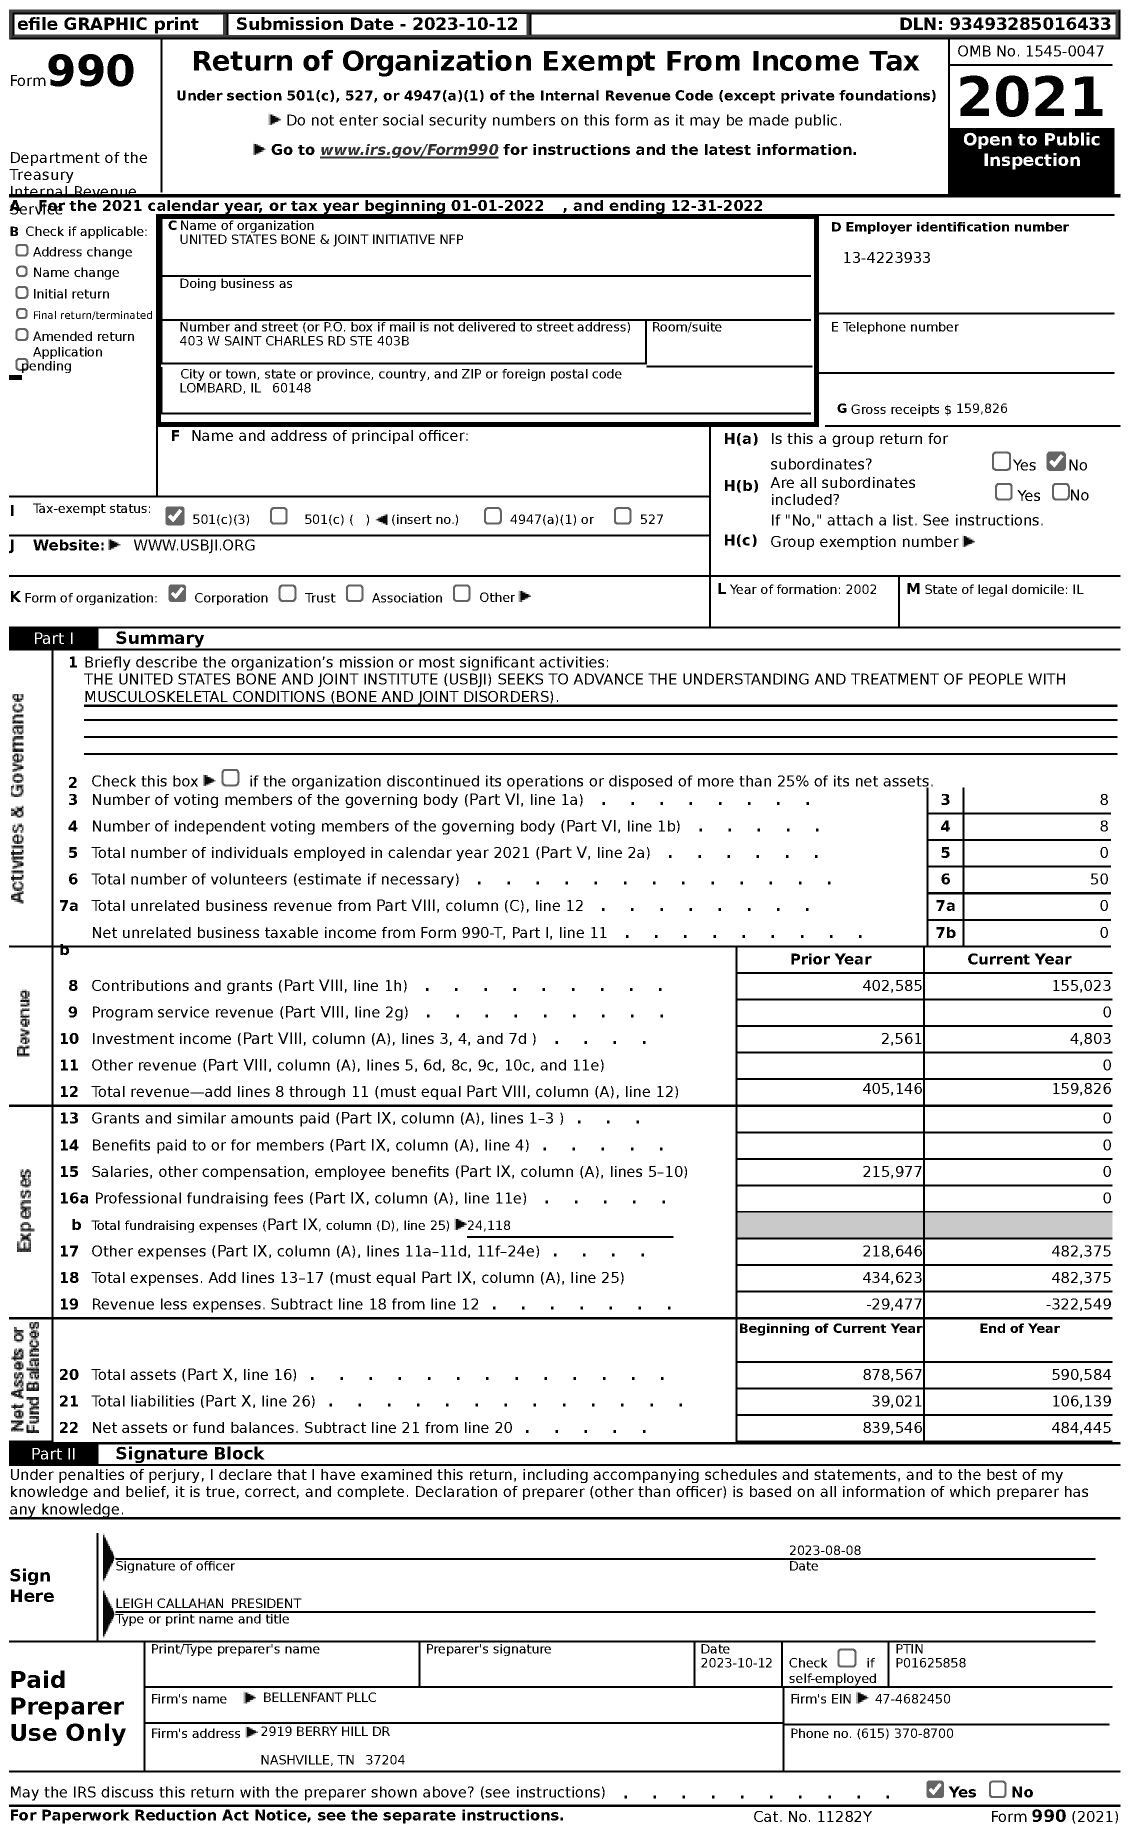 Image of first page of 2022 Form 990 for United States Bone And Joint Initiative NFP